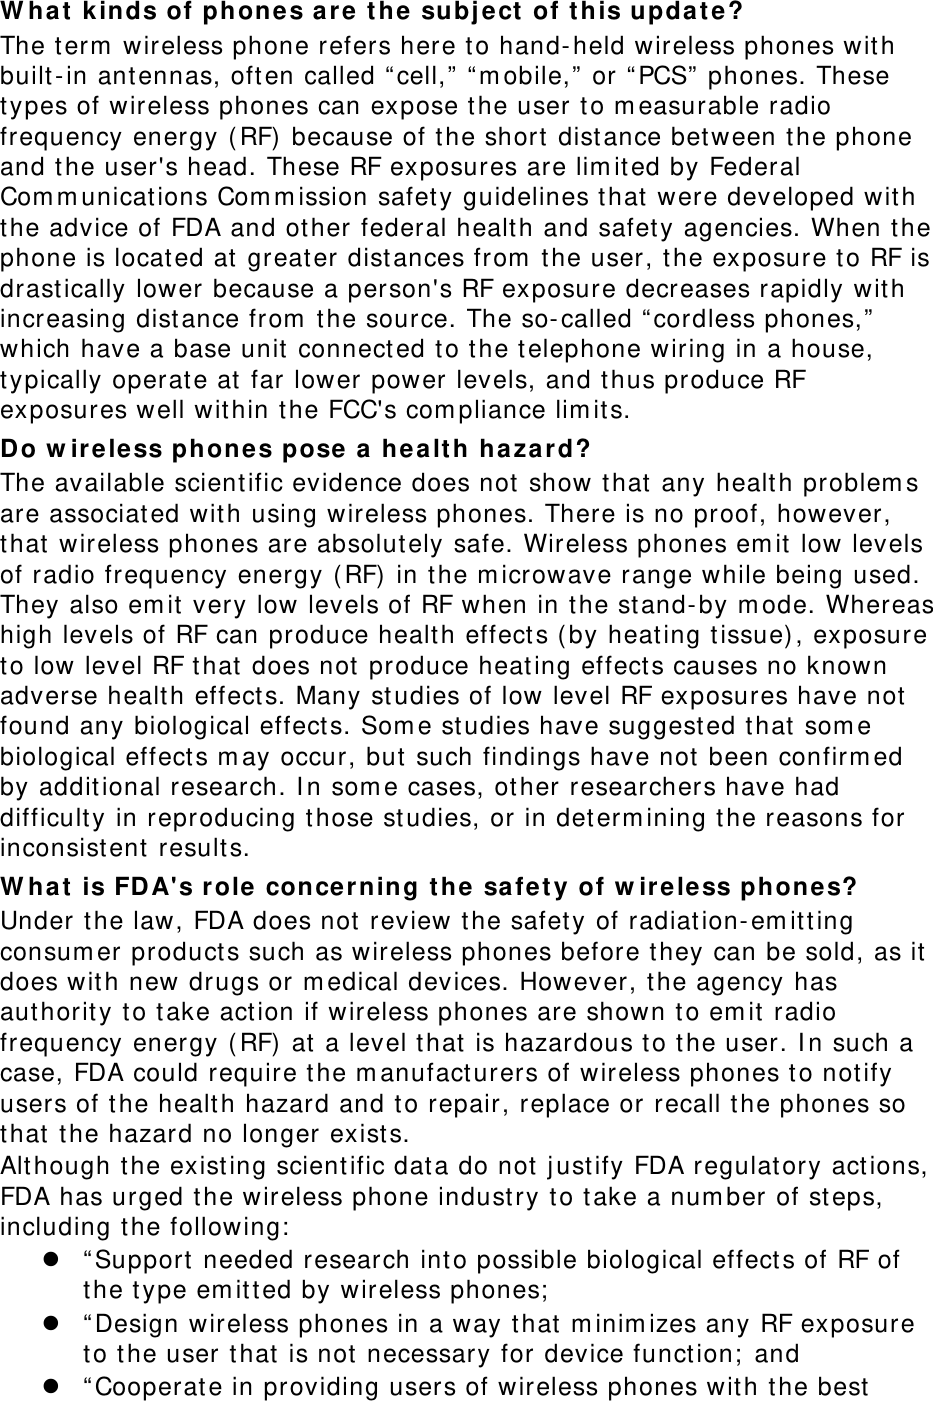 W hat  k inds of phones a re t he subj ect  of t his updat e ? The term  wireless phone refers here t o hand- held wireless phones wit h built- in ant ennas, oft en called “ cell,” “ m obile,”  or “ PCS”  phones. These types of wireless phones can expose t he user t o m easurable radio frequency energy ( RF)  because of t he short dist ance bet ween the phone and t he user&apos;s head. These RF exposures are lim ited by Federal Com m unicat ions Com m ission safety guidelines that  were developed wit h the advice of FDA and ot her federal health and safety agencies. When the phone is locat ed at greater dist ances from  t he user, the exposure t o RF is drastically lower because a person&apos;s RF exposure decreases rapidly wit h increasing dist ance from  t he source. The so- called “ cordless phones,”  which have a base unit  connect ed to the t elephone wiring in a house, typically operat e at  far lower power levels, and t hus produce RF exposures well within t he FCC&apos;s com pliance lim it s. Do w irele ss phones pose a hea lt h ha za rd? The available scient ific evidence does not  show t hat  any healt h problem s are associat ed wit h using wireless phones. There is no proof, however, that  wireless phones are absolutely safe. Wireless phones em it low levels of radio frequency energy (RF)  in the m icrowave range while being used. They also em it  very low levels of RF when in t he stand- by m ode. Whereas high levels of RF can produce healt h effect s (by heat ing t issue) , exposure to low level RF t hat  does not  produce heat ing effect s causes no known adverse healt h effect s. Many st udies of low level RF exposures have not  found any biological effect s. Som e st udies have suggest ed that  som e biological effects m ay occur, but  such findings have not  been confirm ed by addit ional research. I n som e cases, other researchers have had difficulty in reproducing t hose st udies, or in det erm ining t he reasons for inconsist ent  result s. W hat  is FD A&apos;s role  conce r ning t he safety of w irele ss phones? Under the law, FDA does not  review t he safet y of radiat ion- em it ting consum er product s such as wireless phones before t hey can be sold, as it  does with new drugs or m edical devices. However, the agency has authority t o take act ion if wireless phones are shown to em it  radio frequency energy ( RF)  at  a level t hat  is hazardous t o the user. I n such a case, FDA could require t he m anufact urers of wireless phones t o not ify users of the healt h hazard and t o repair, replace or recall t he phones so that  t he hazard no longer exists. Although the existing scient ific data do not j ust ify FDA regulat ory act ions, FDA has urged t he wireless phone indust ry t o take a num ber of steps, including the following:   “ Support  needed research int o possible biological effect s of RF of the type em itt ed by wireless phones;   “ Design wireless phones in a way t hat  m inim izes any RF exposure to t he user t hat  is not necessary for device funct ion;  and  “ Cooperat e in providing users of wireless phones wit h the best  